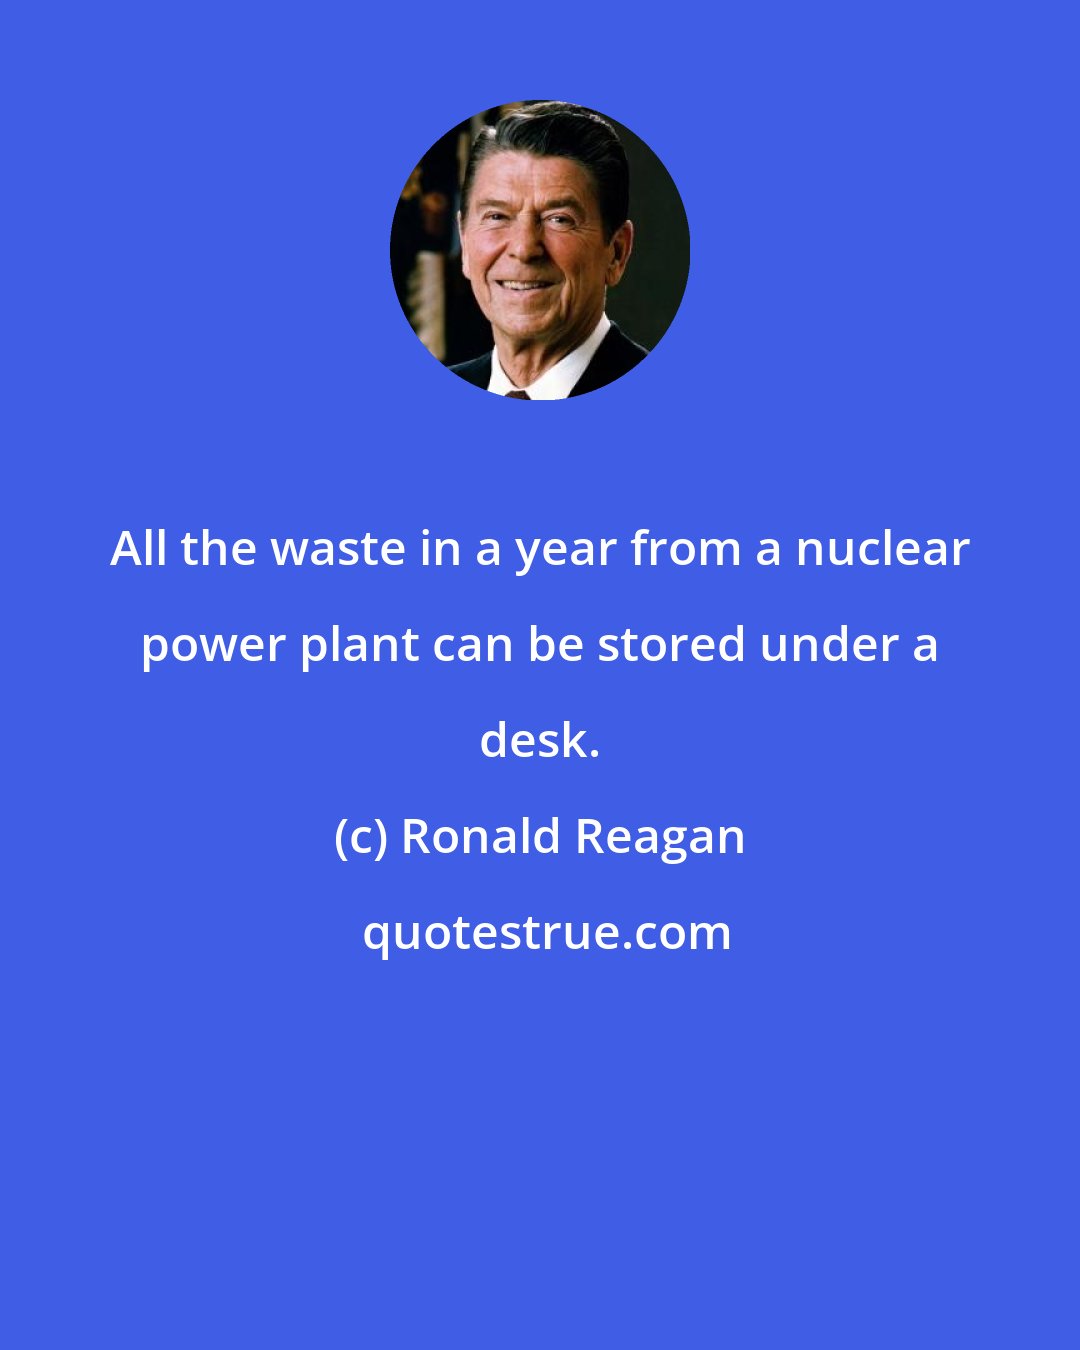 Ronald Reagan: All the waste in a year from a nuclear power plant can be stored under a desk.